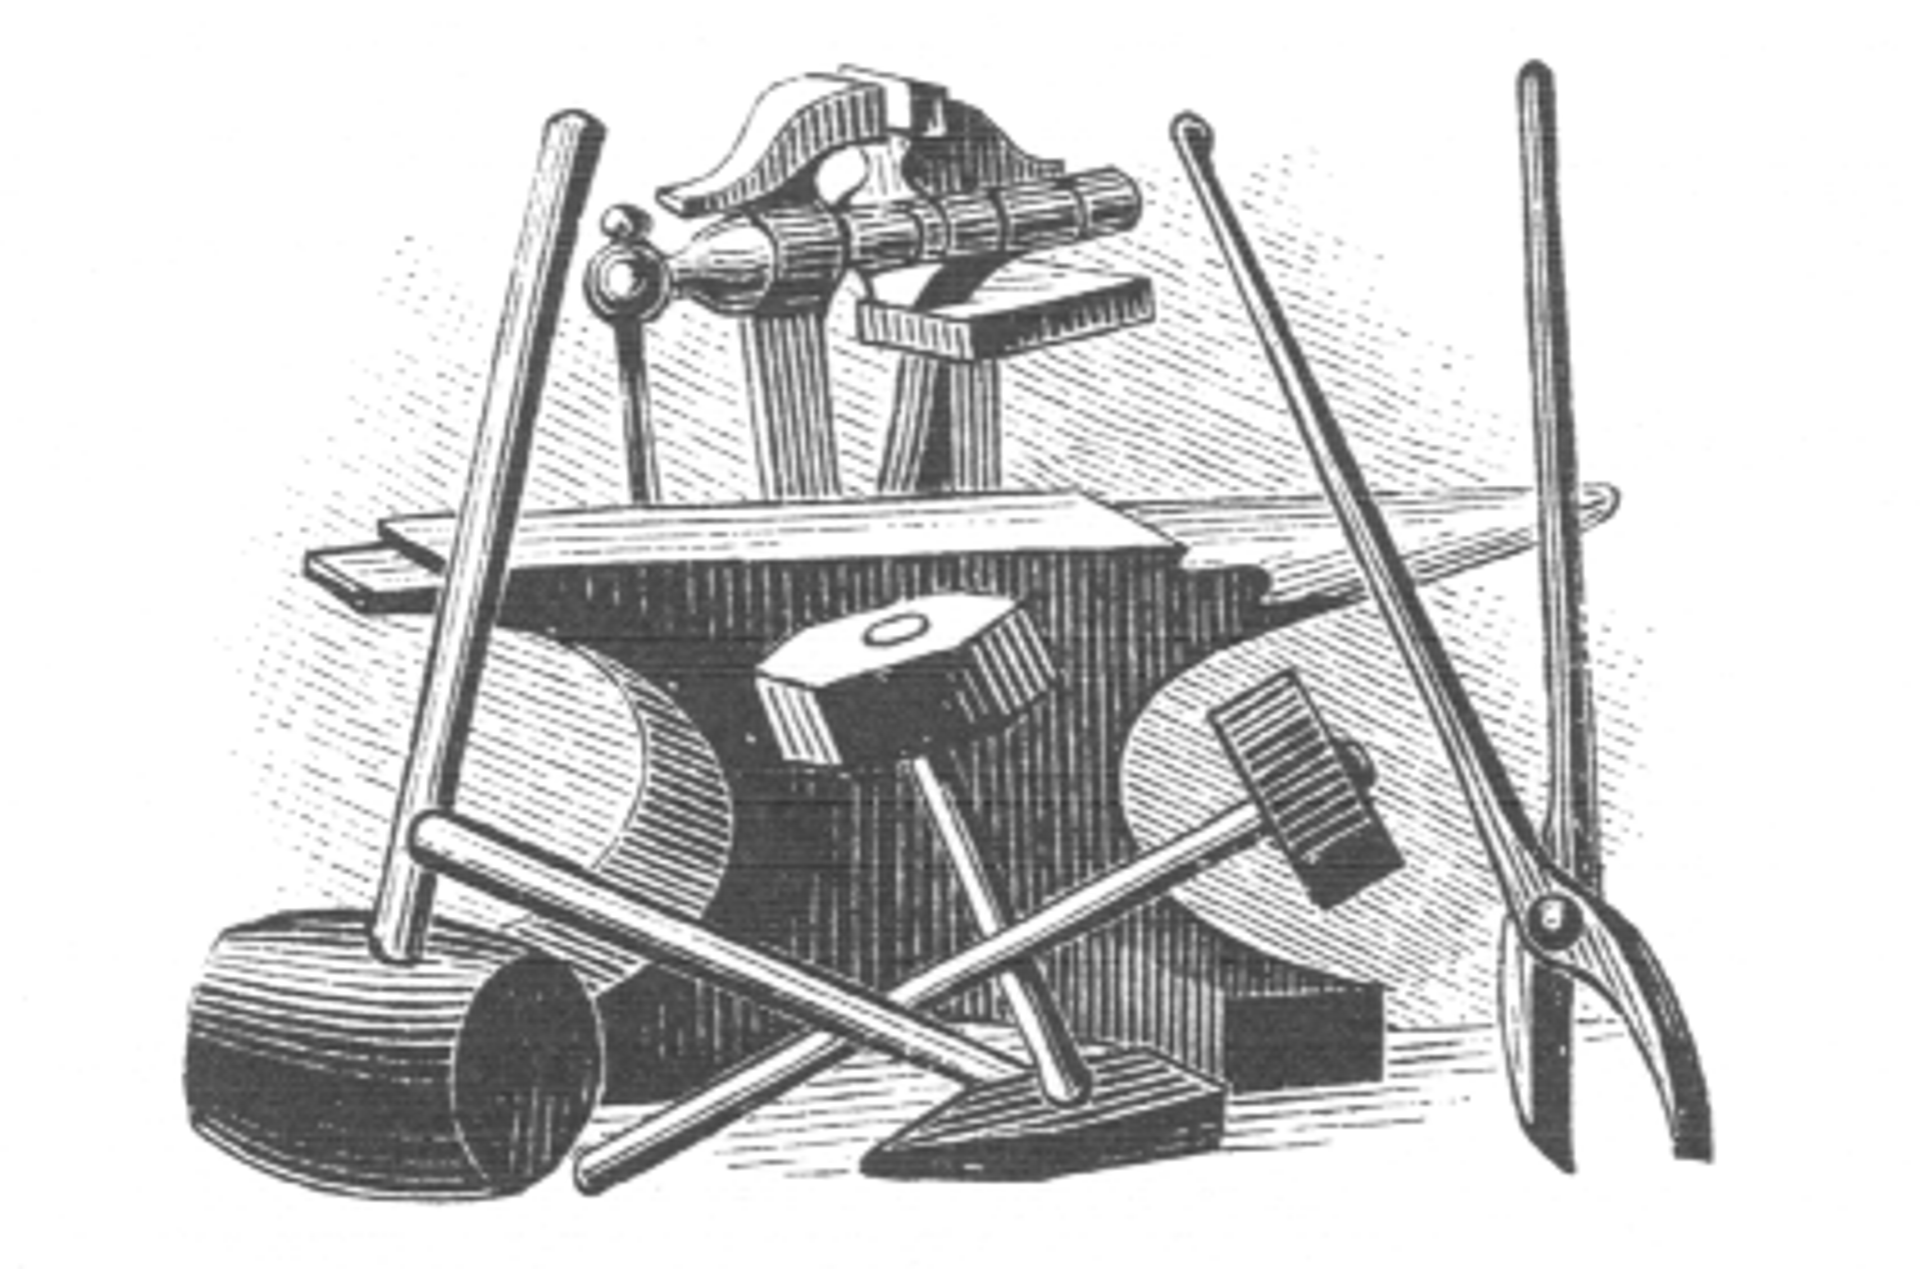 Anvil clipart colonial blacksmith. Between farrier and hand